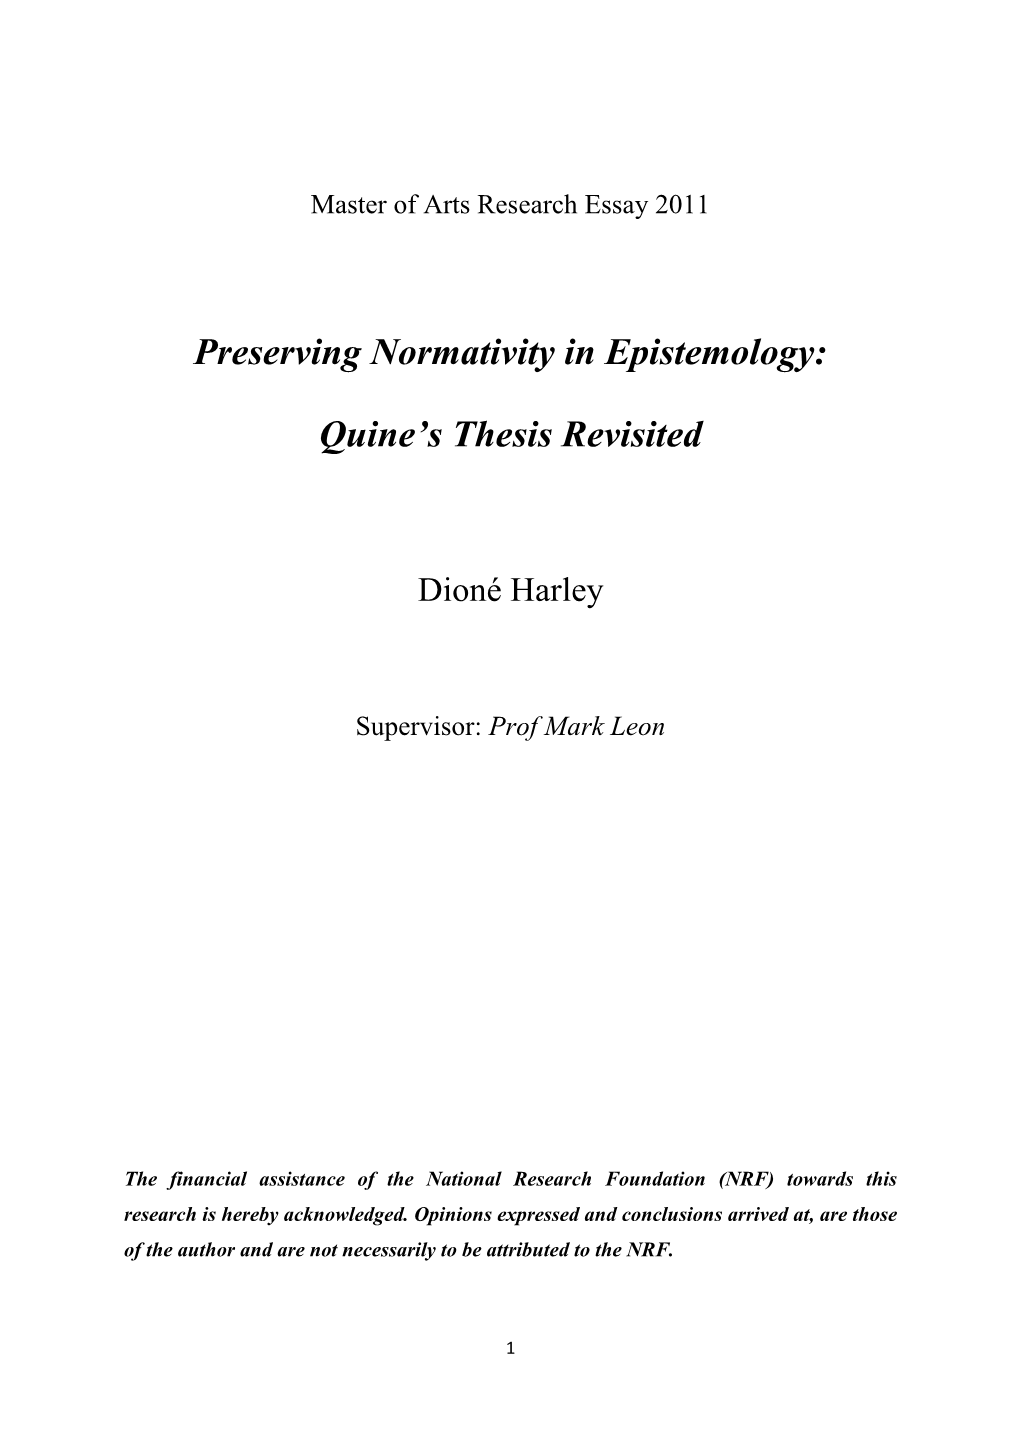 Preserving Normativity in Epistemology: Quine's Thesis